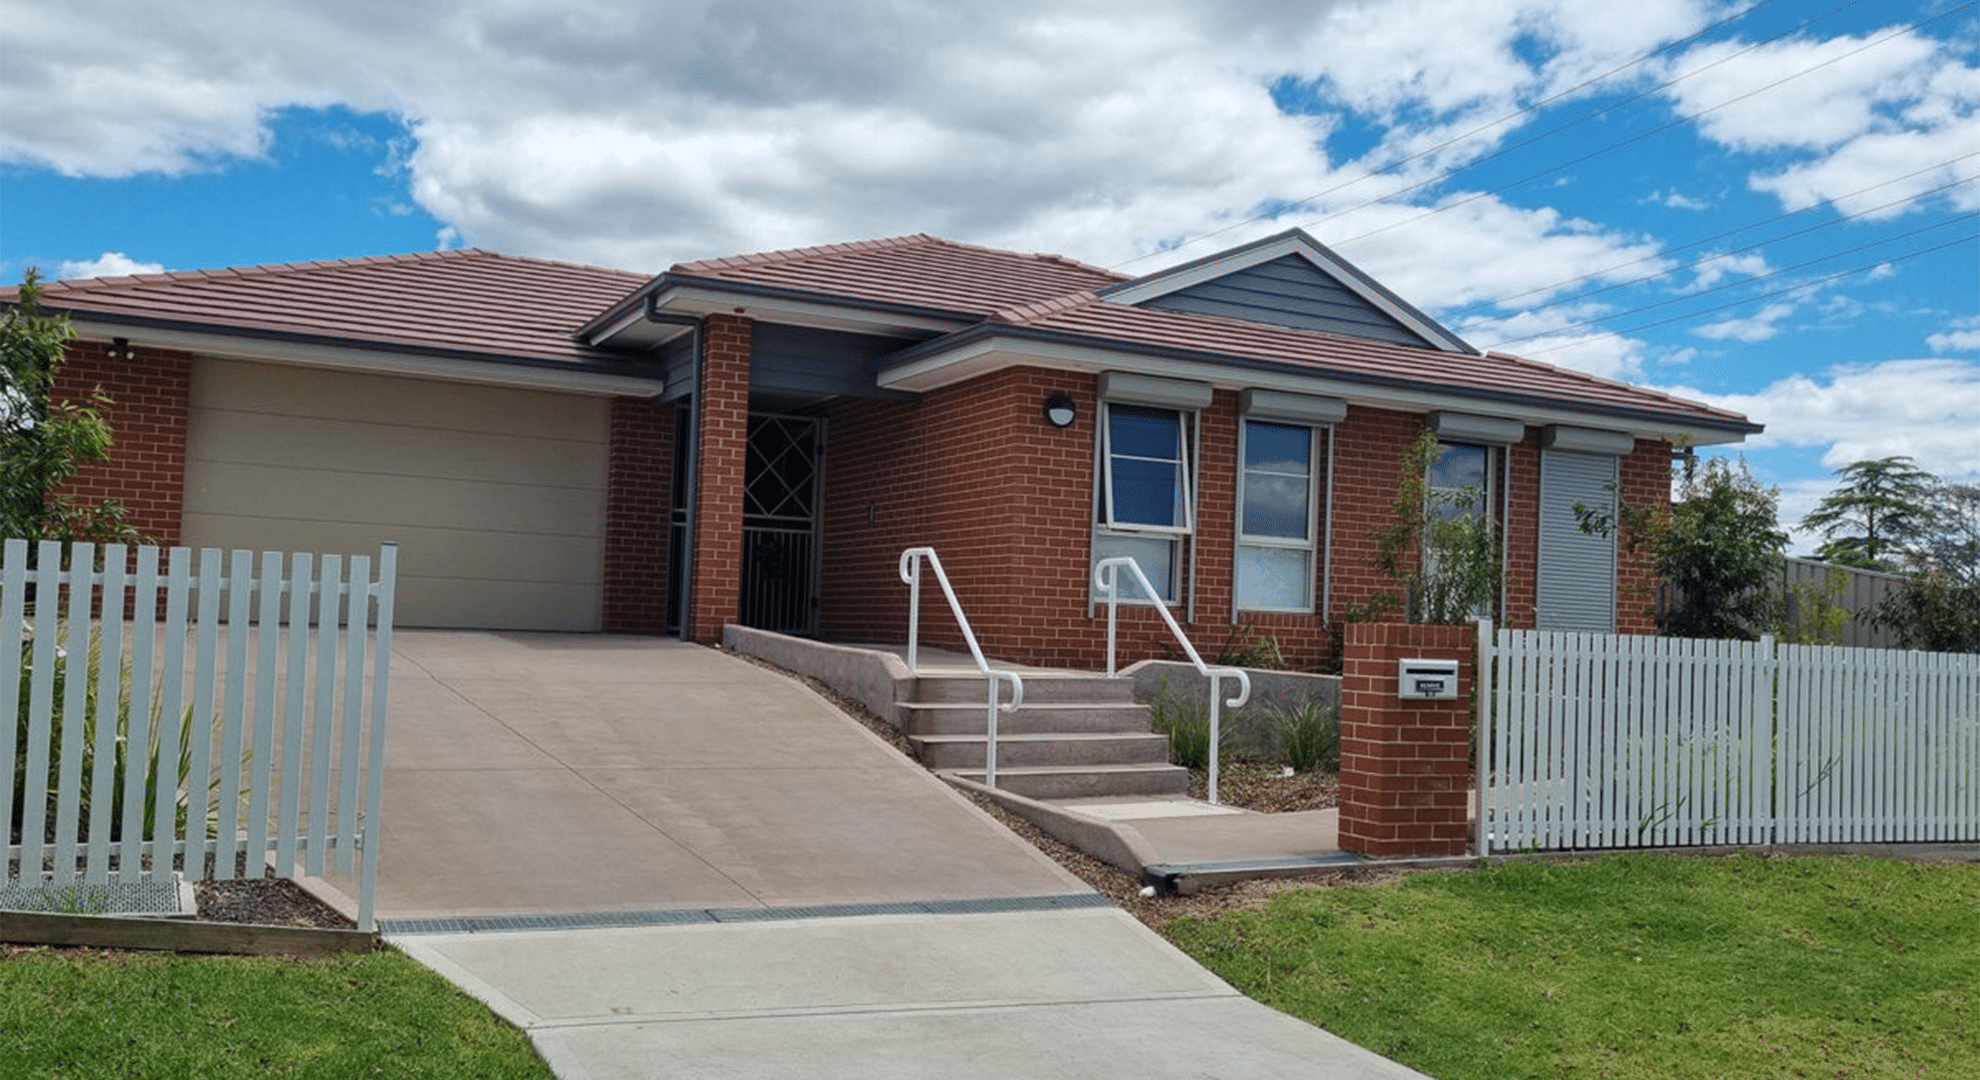 Front view of the brick, single story Wallsend SIL home